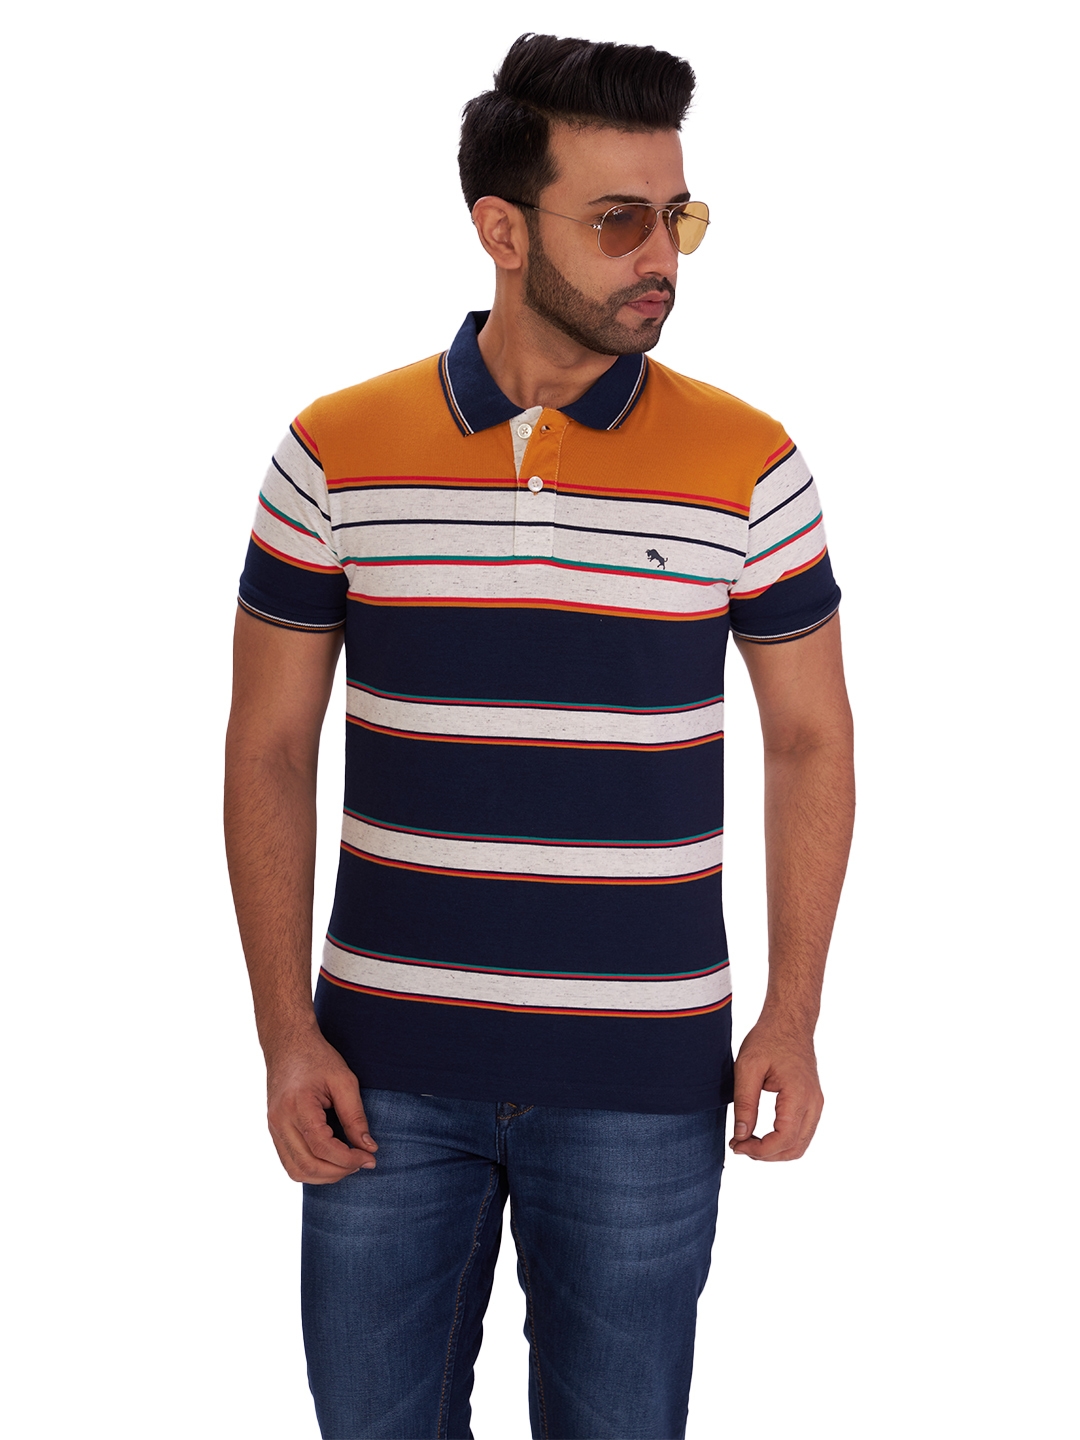 D'cot by Donear | D'cot by Donear Men's Multi Polycotton T-Shirts 0